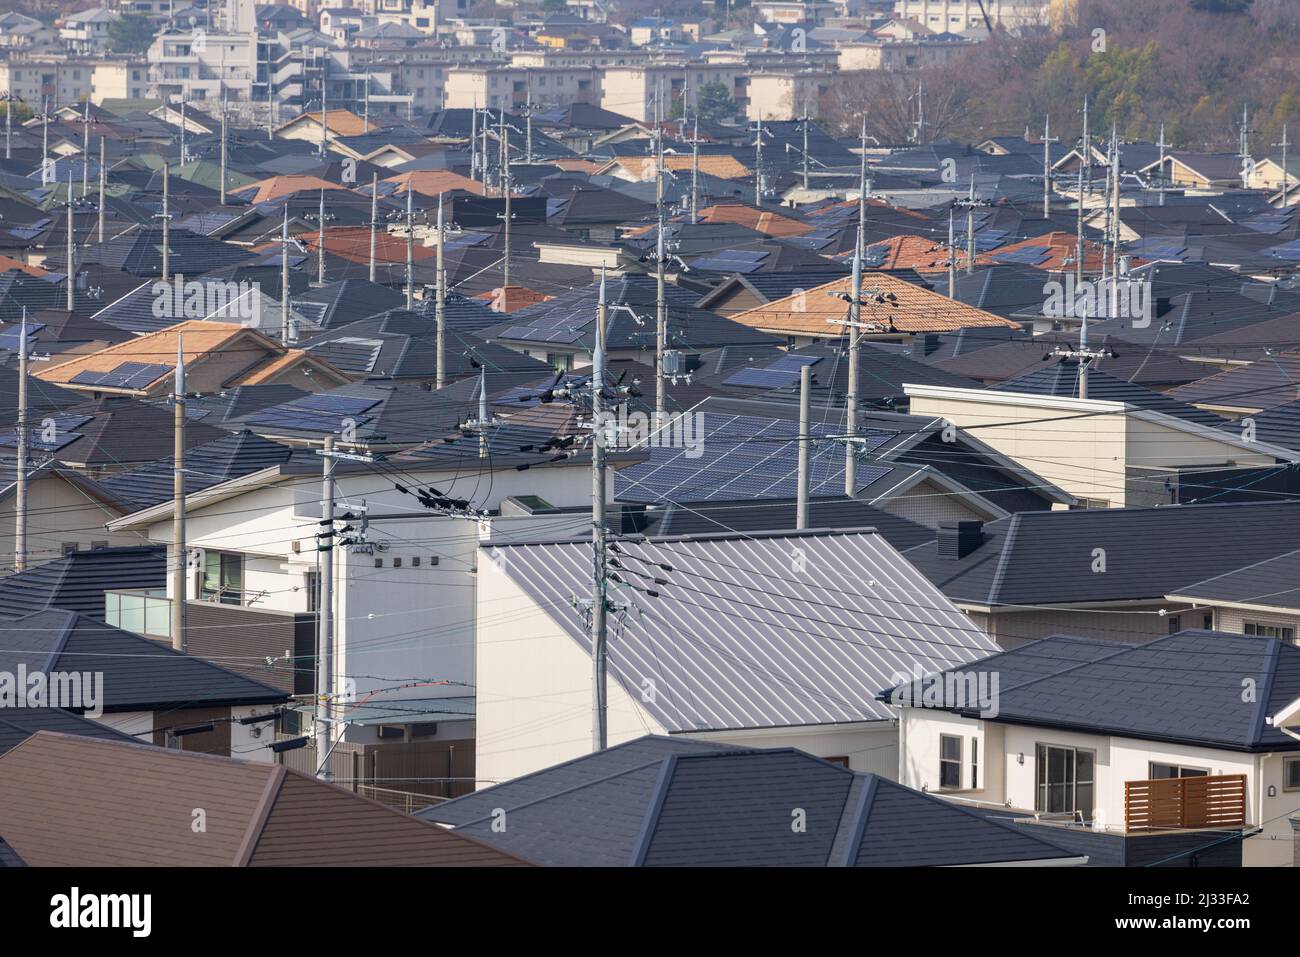 Slanted roofs and electrical poles in suburban landscape Stock Photo